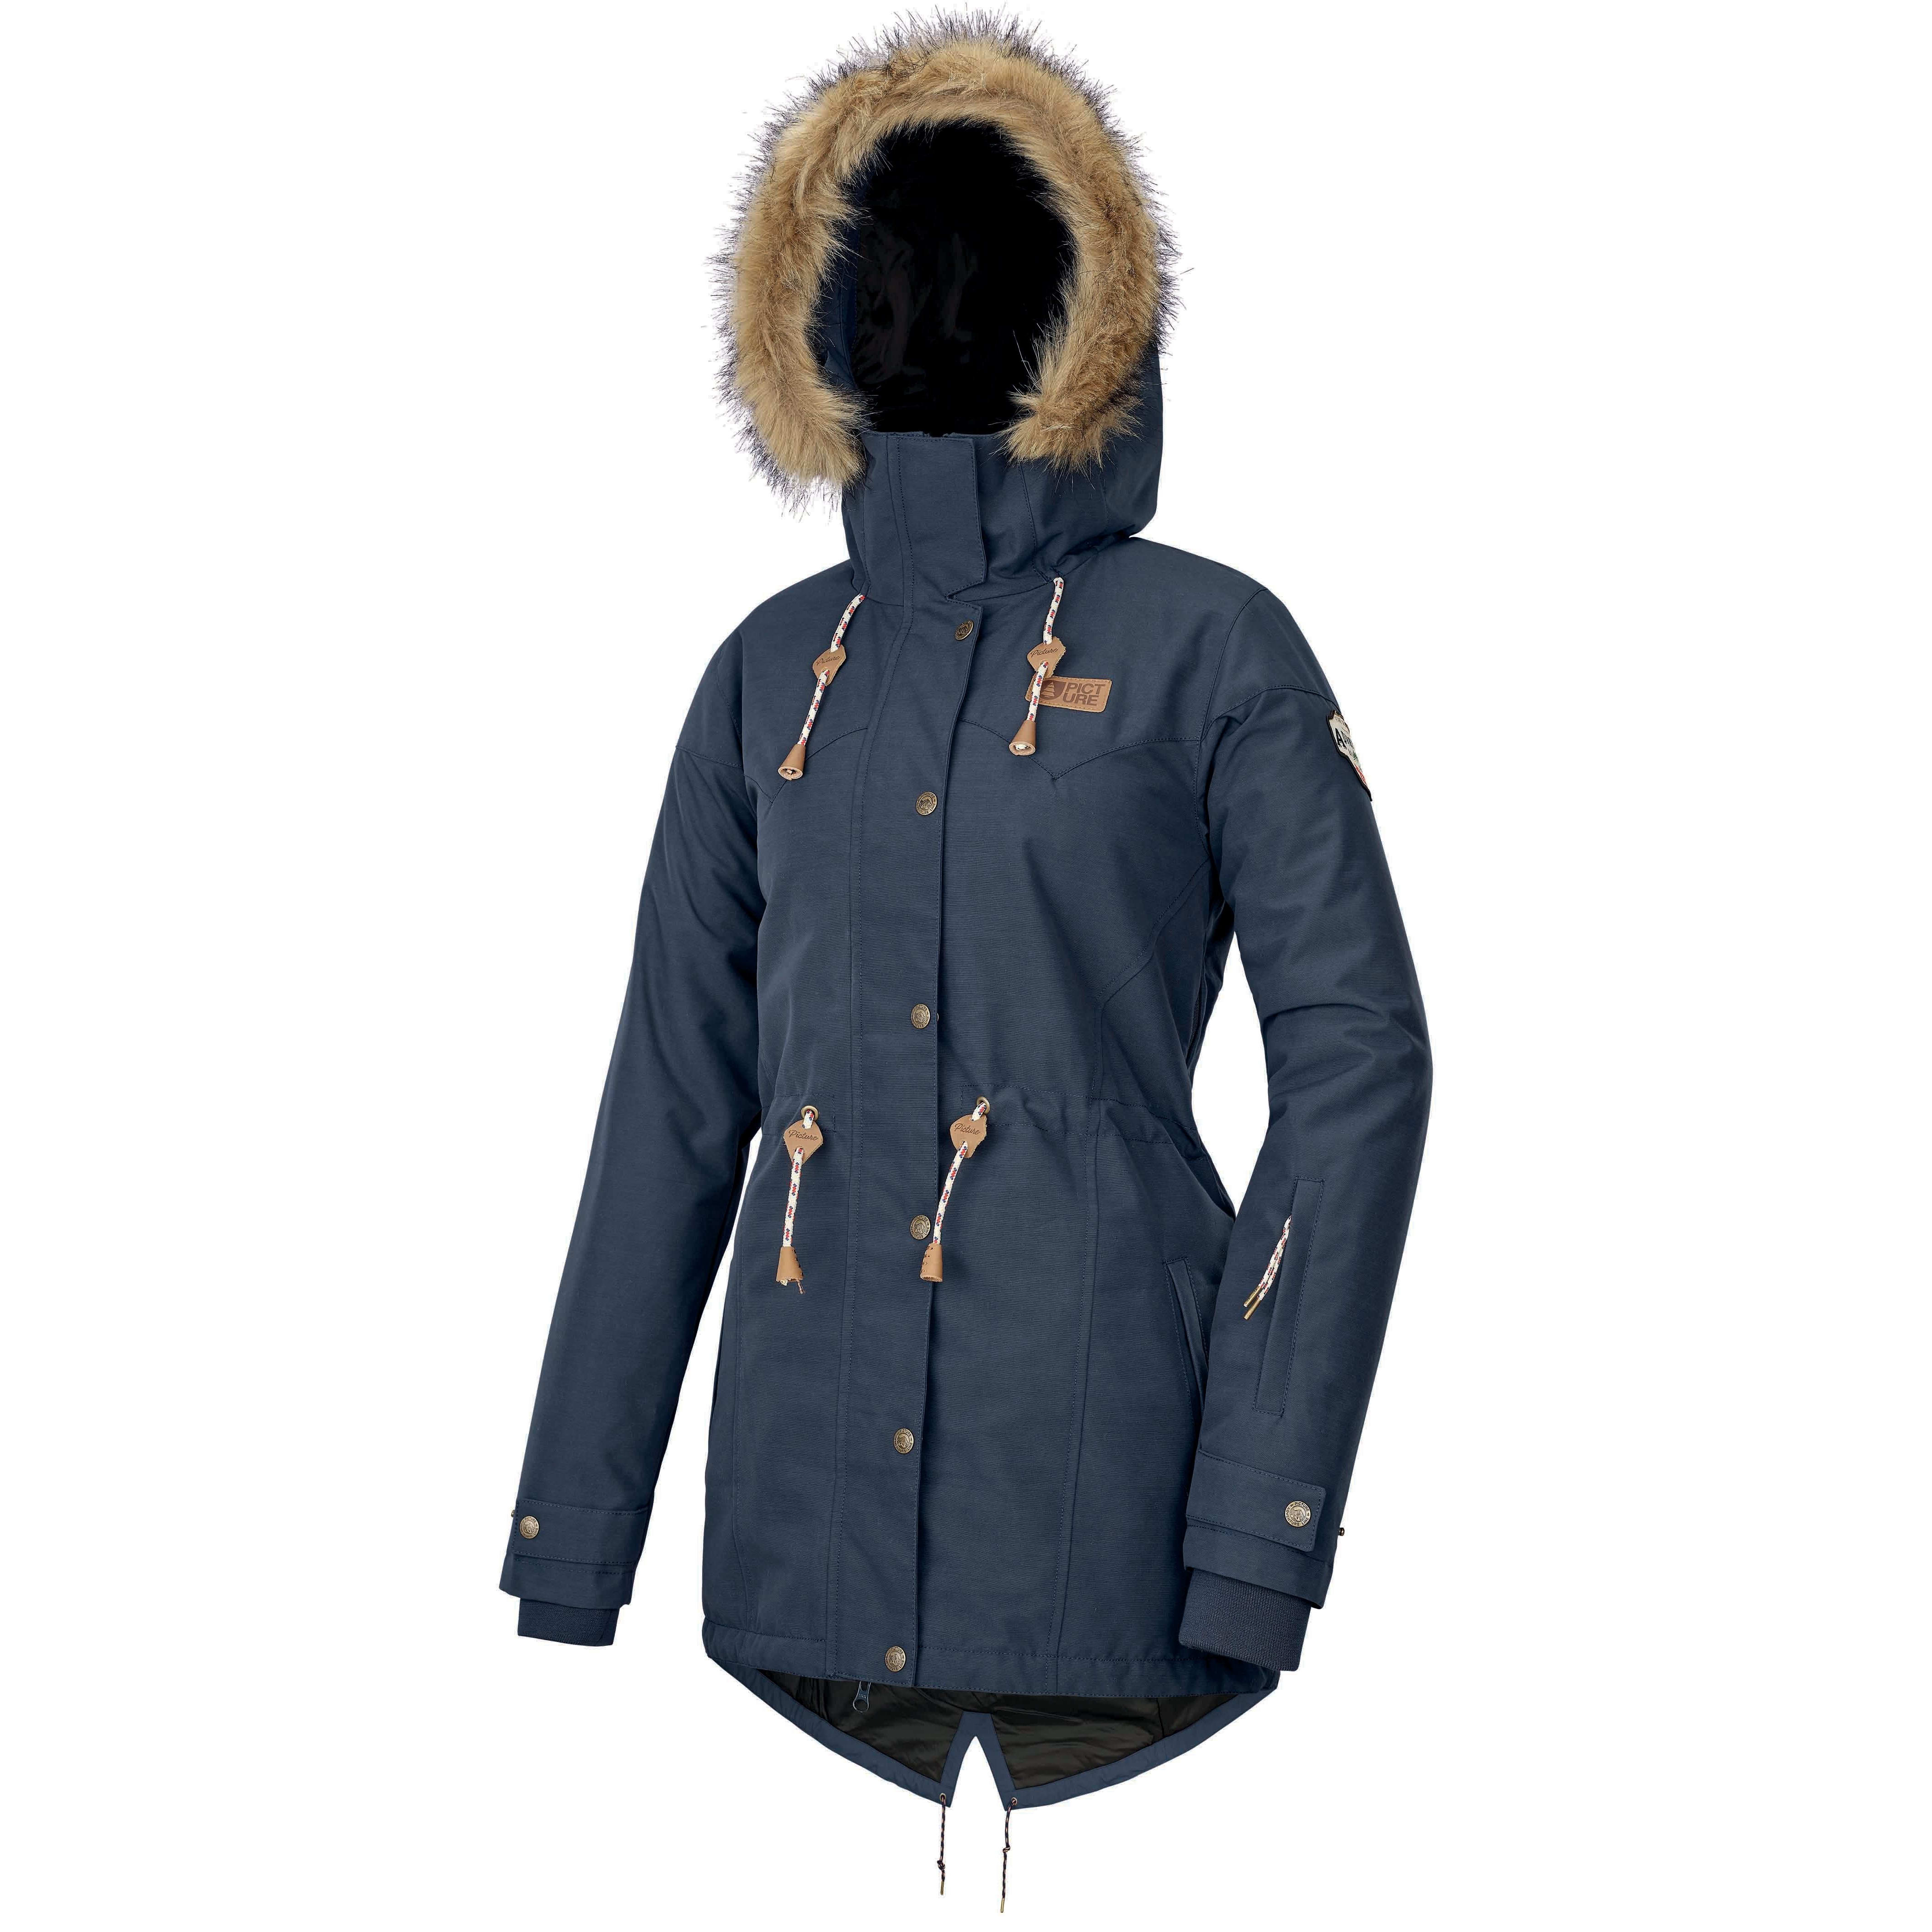 Køb Picture Organic Clothing Women's Katniss Jacket fra Outnorth